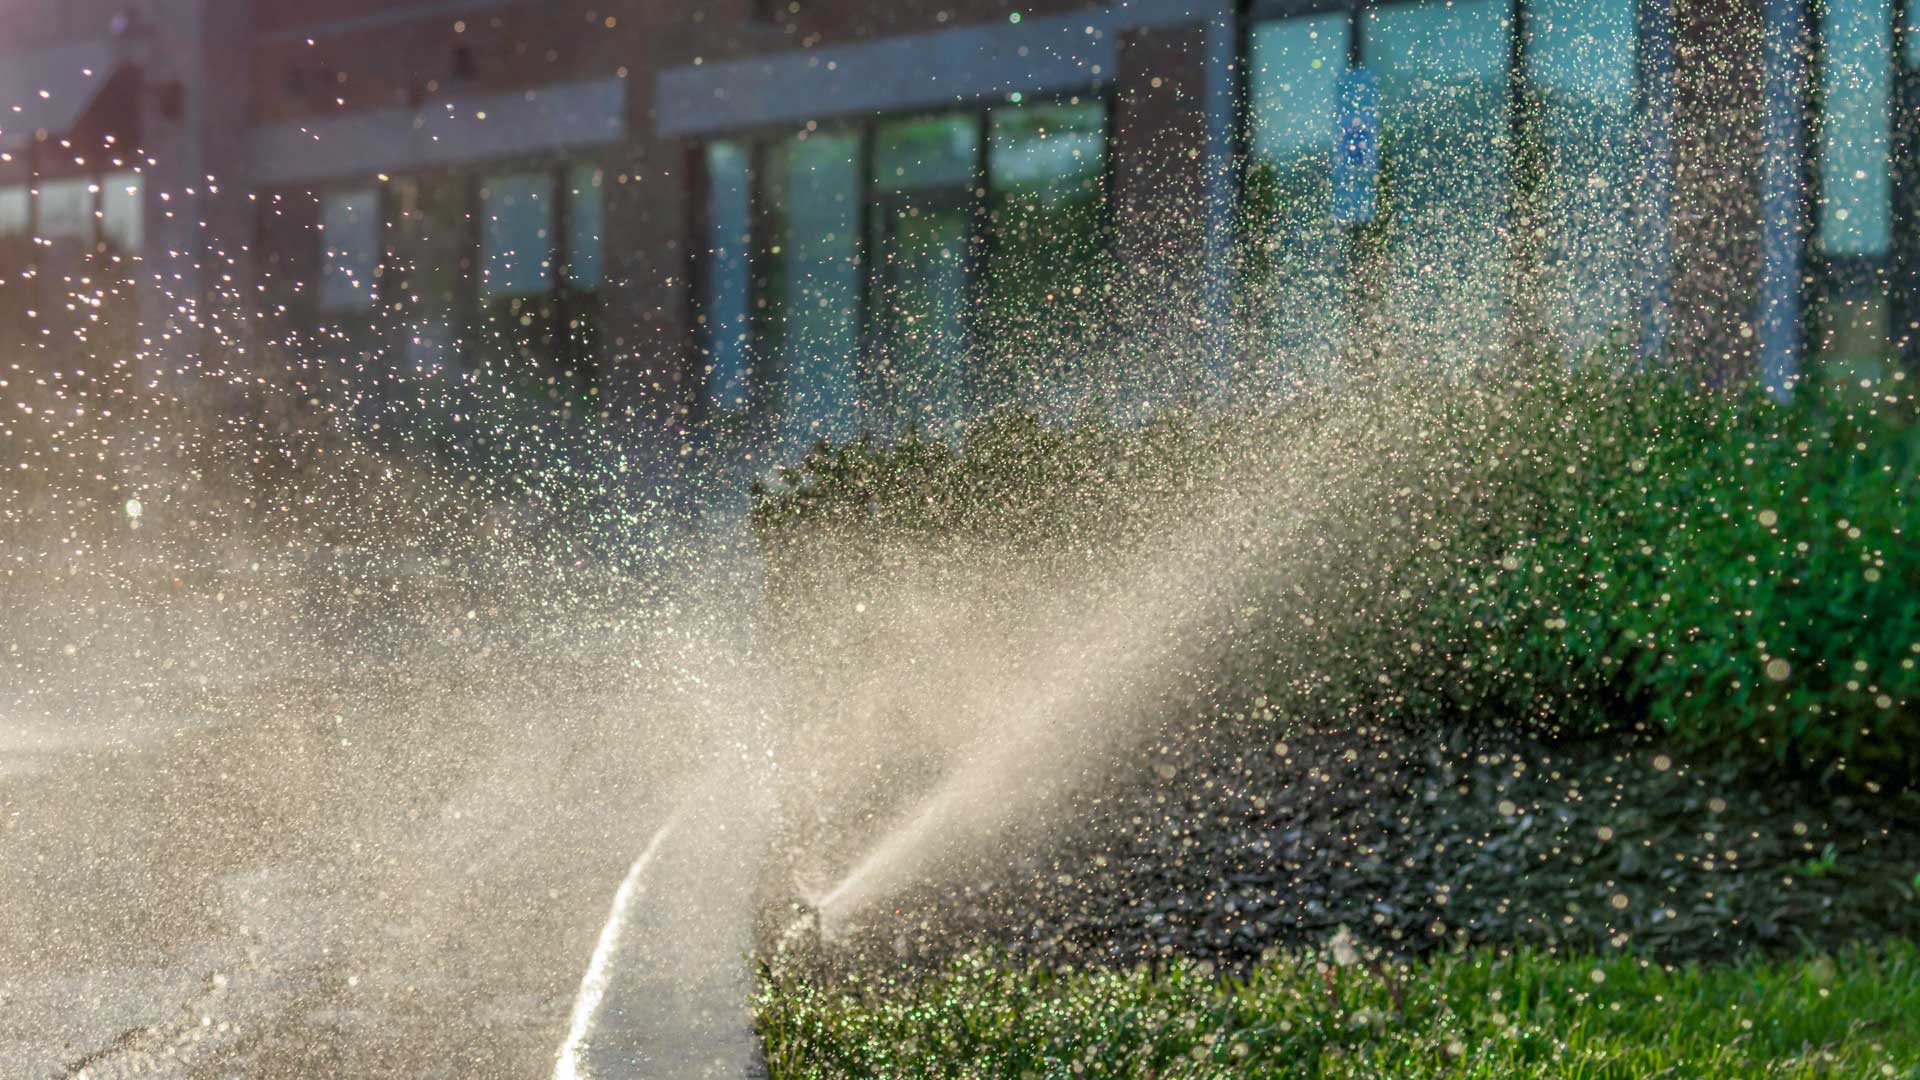 Sprinkler watering a commercial property's lawn in Manhattan, NY.